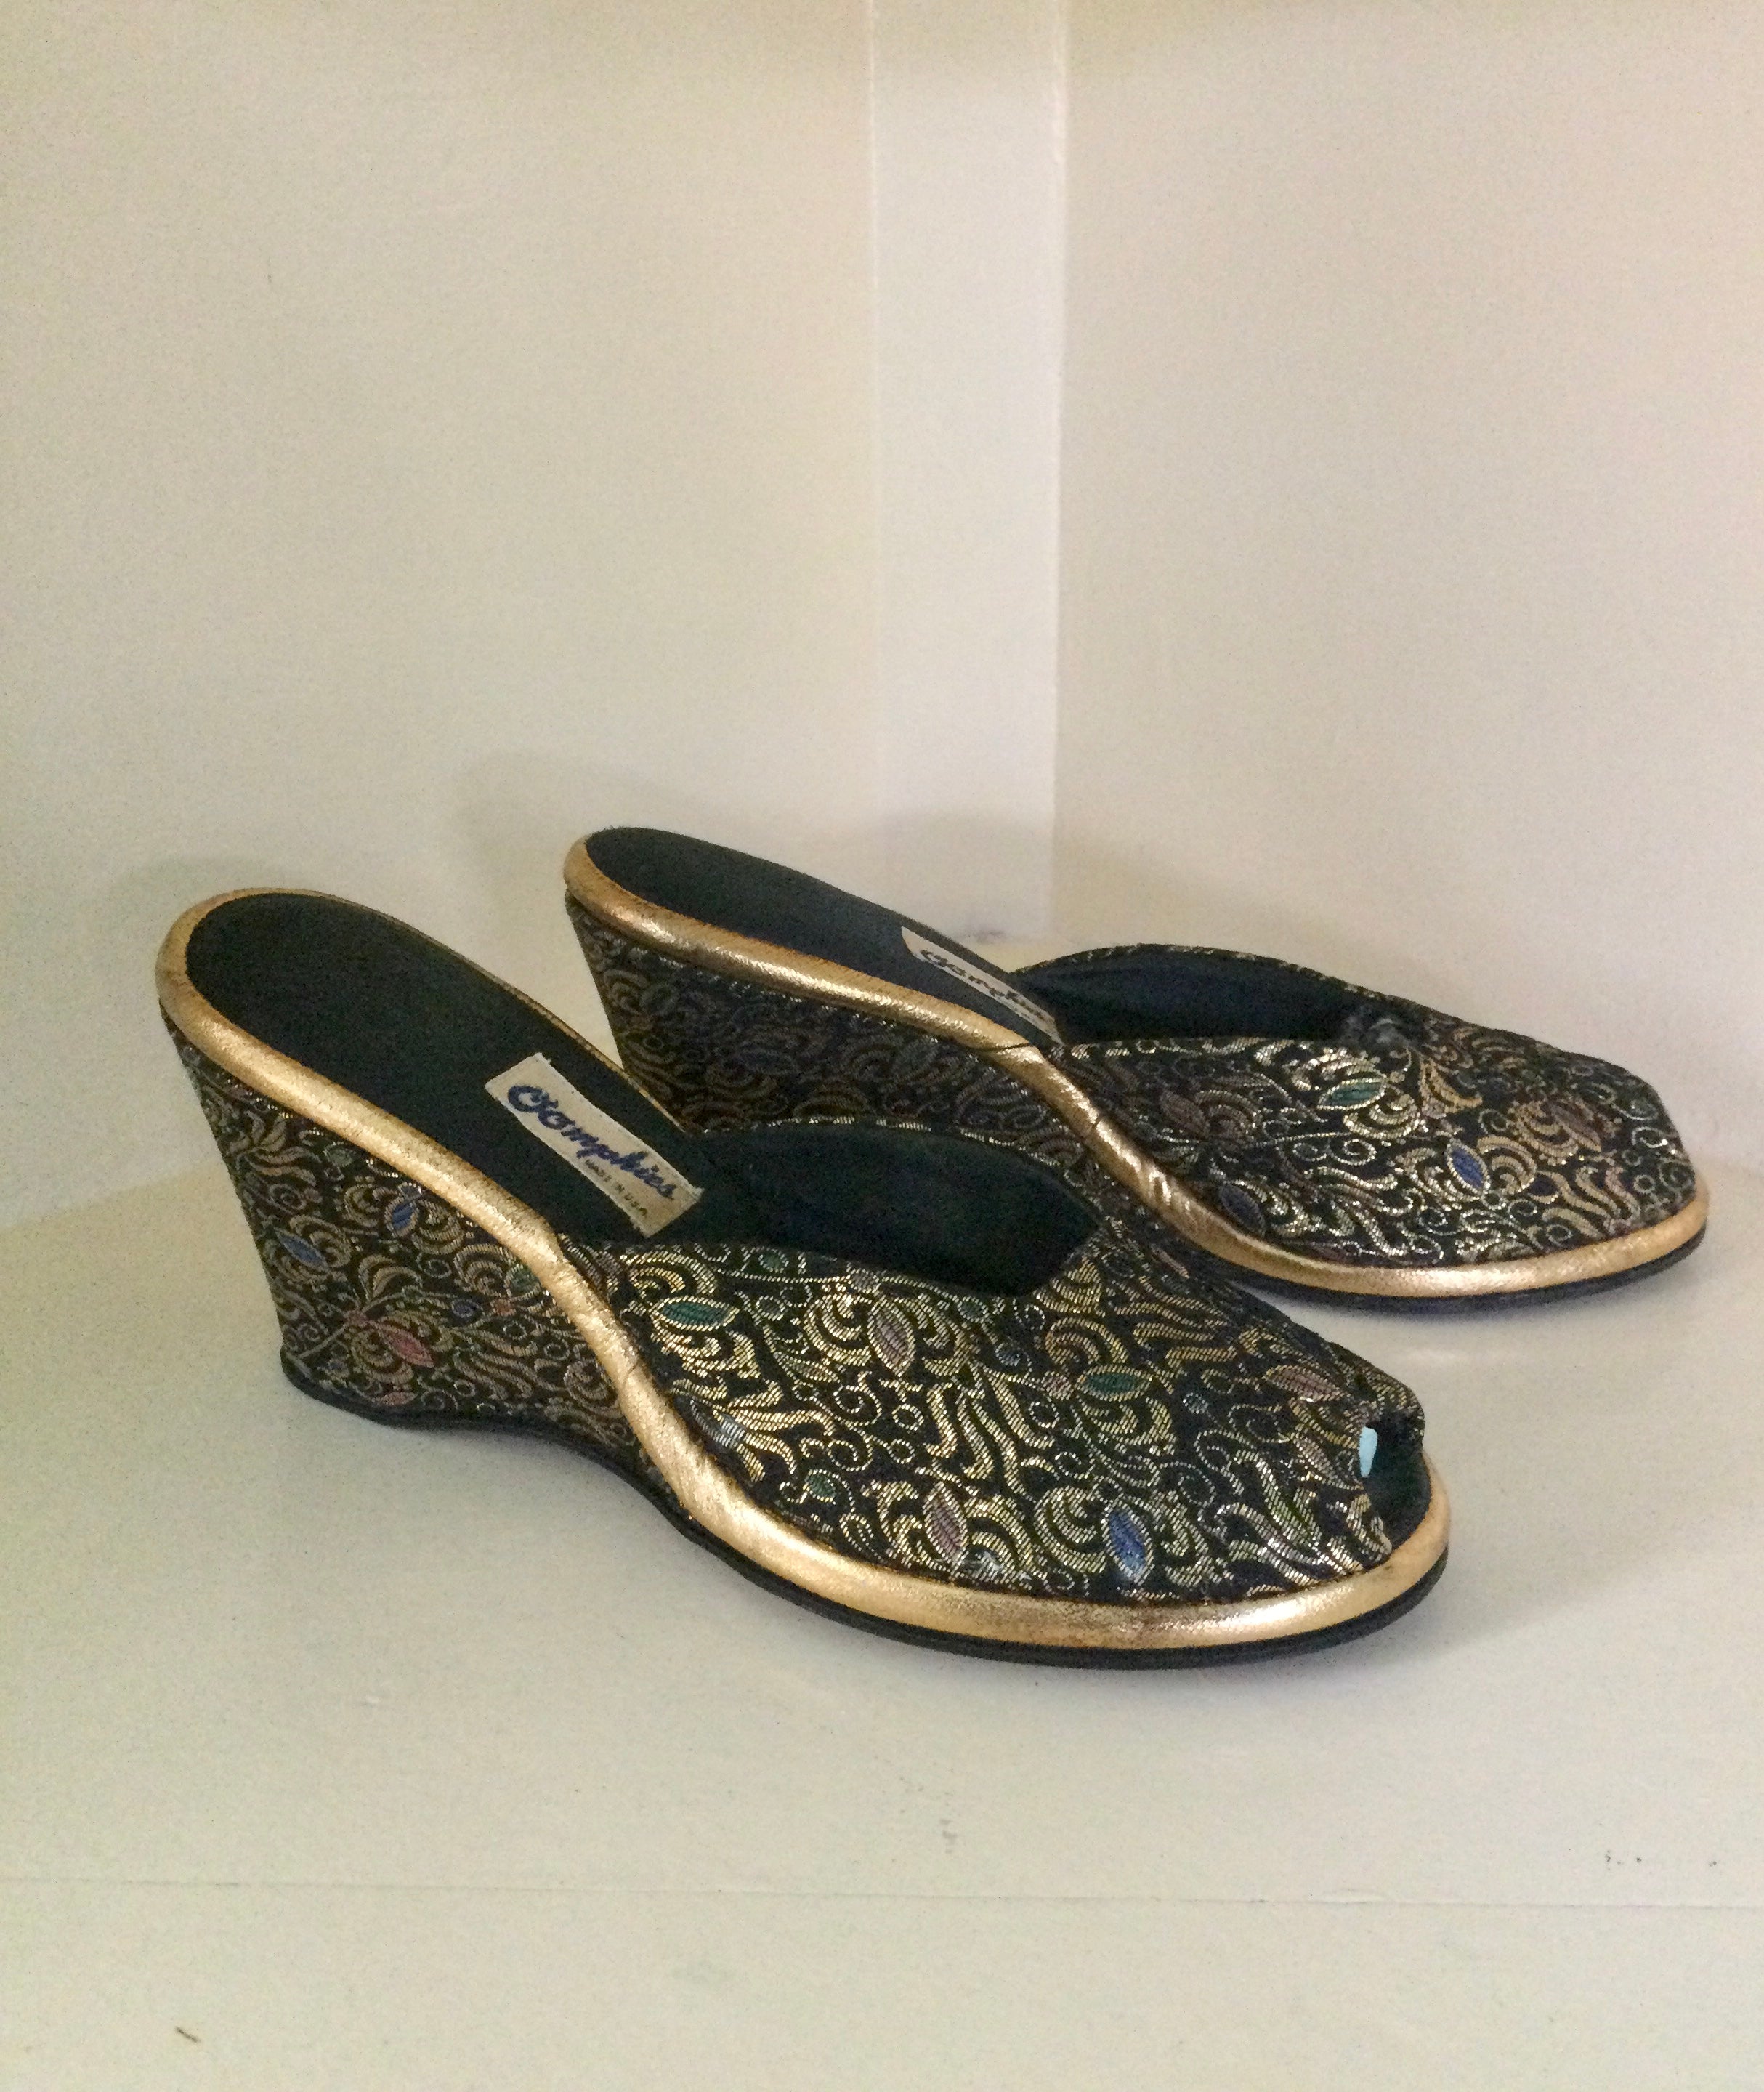 Missionær Agent neutral 1950s Metallic Brocade Wedge Slippers by Oomphies – Hollyland Vintage